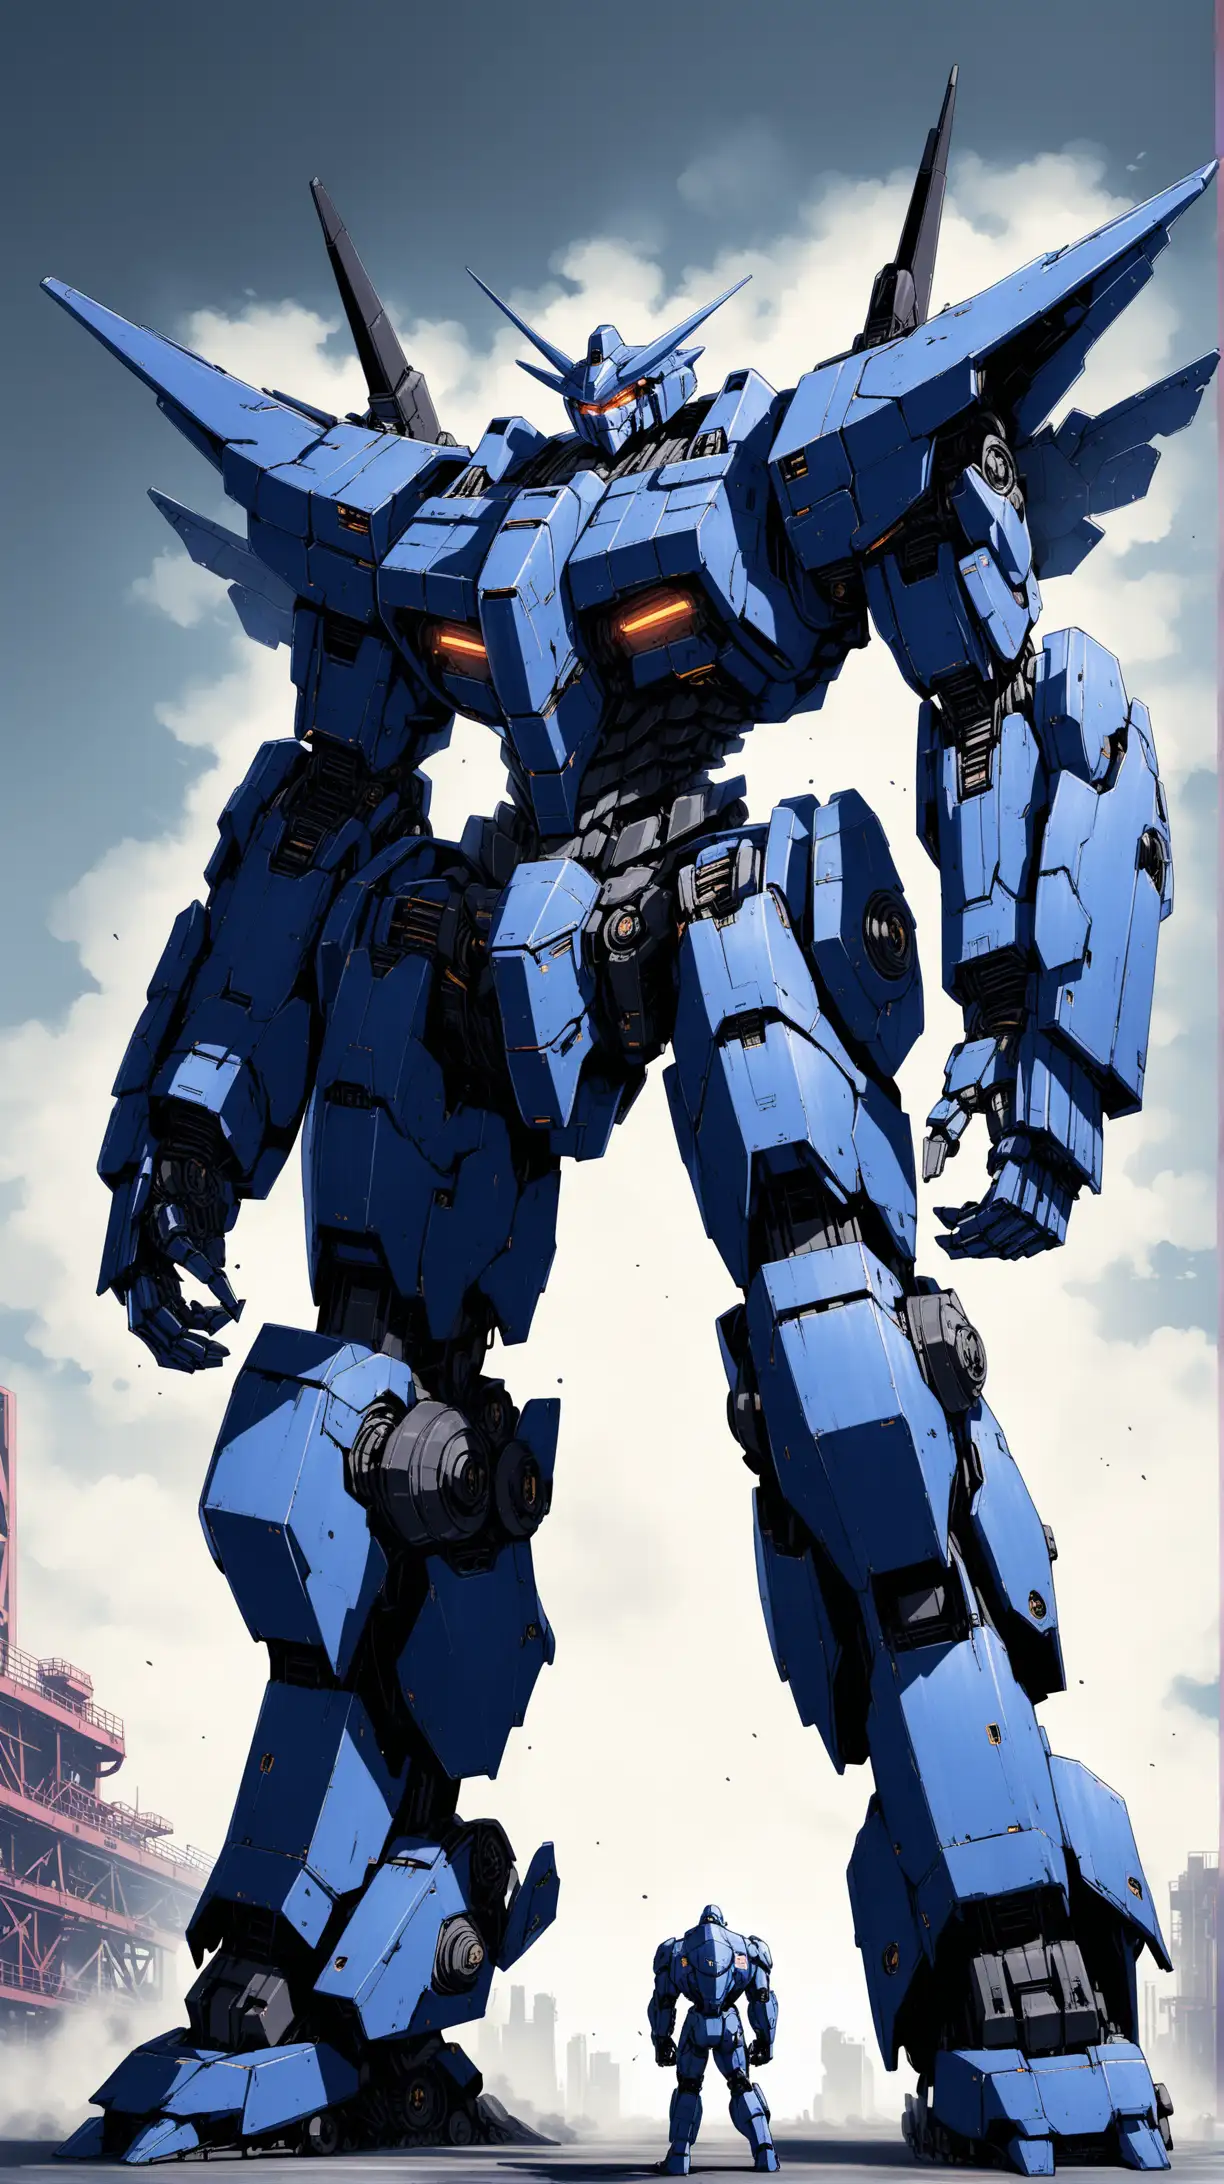 full giant robot with body and arms and legs colored indigo and black, metal, menacing, strong